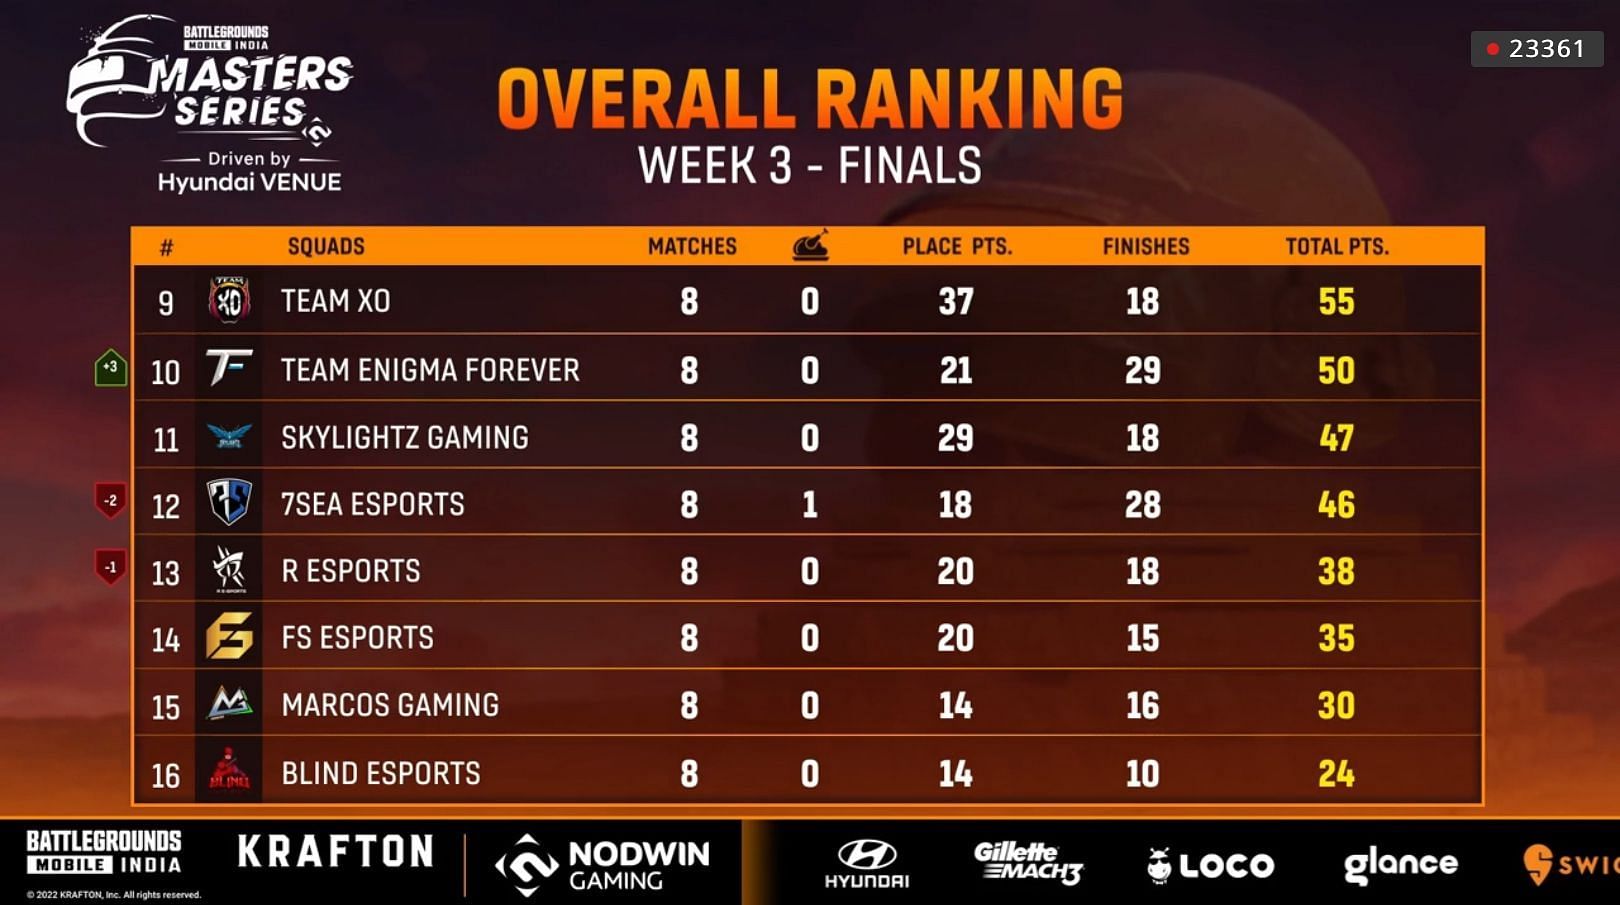 FS Esports grabbed 14th place after Day 2 (Image via Loco)